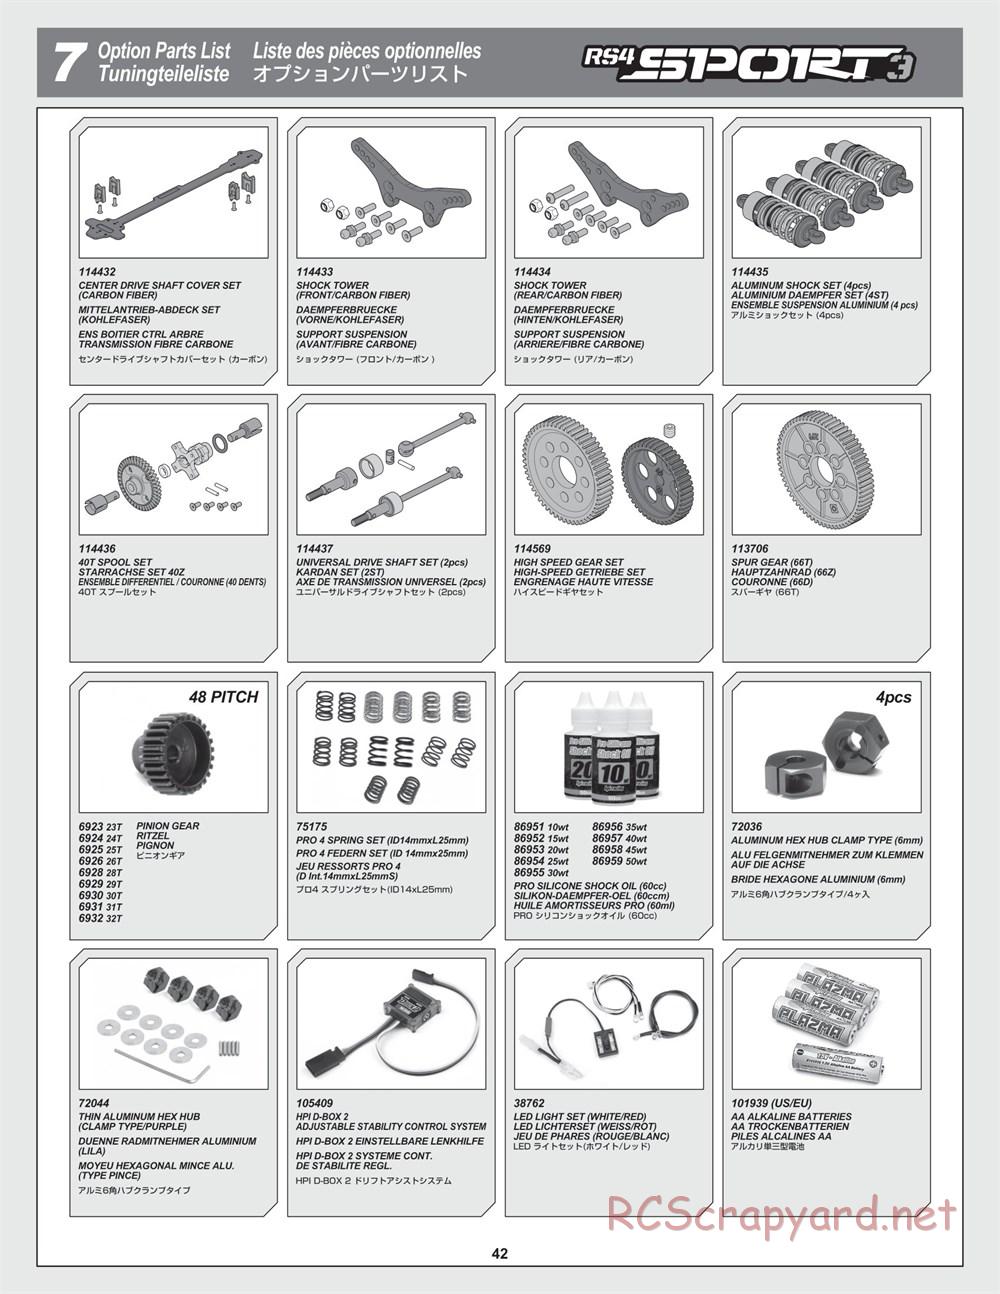 HPI - RS4 Sport 3 - Exploded View - Page 42